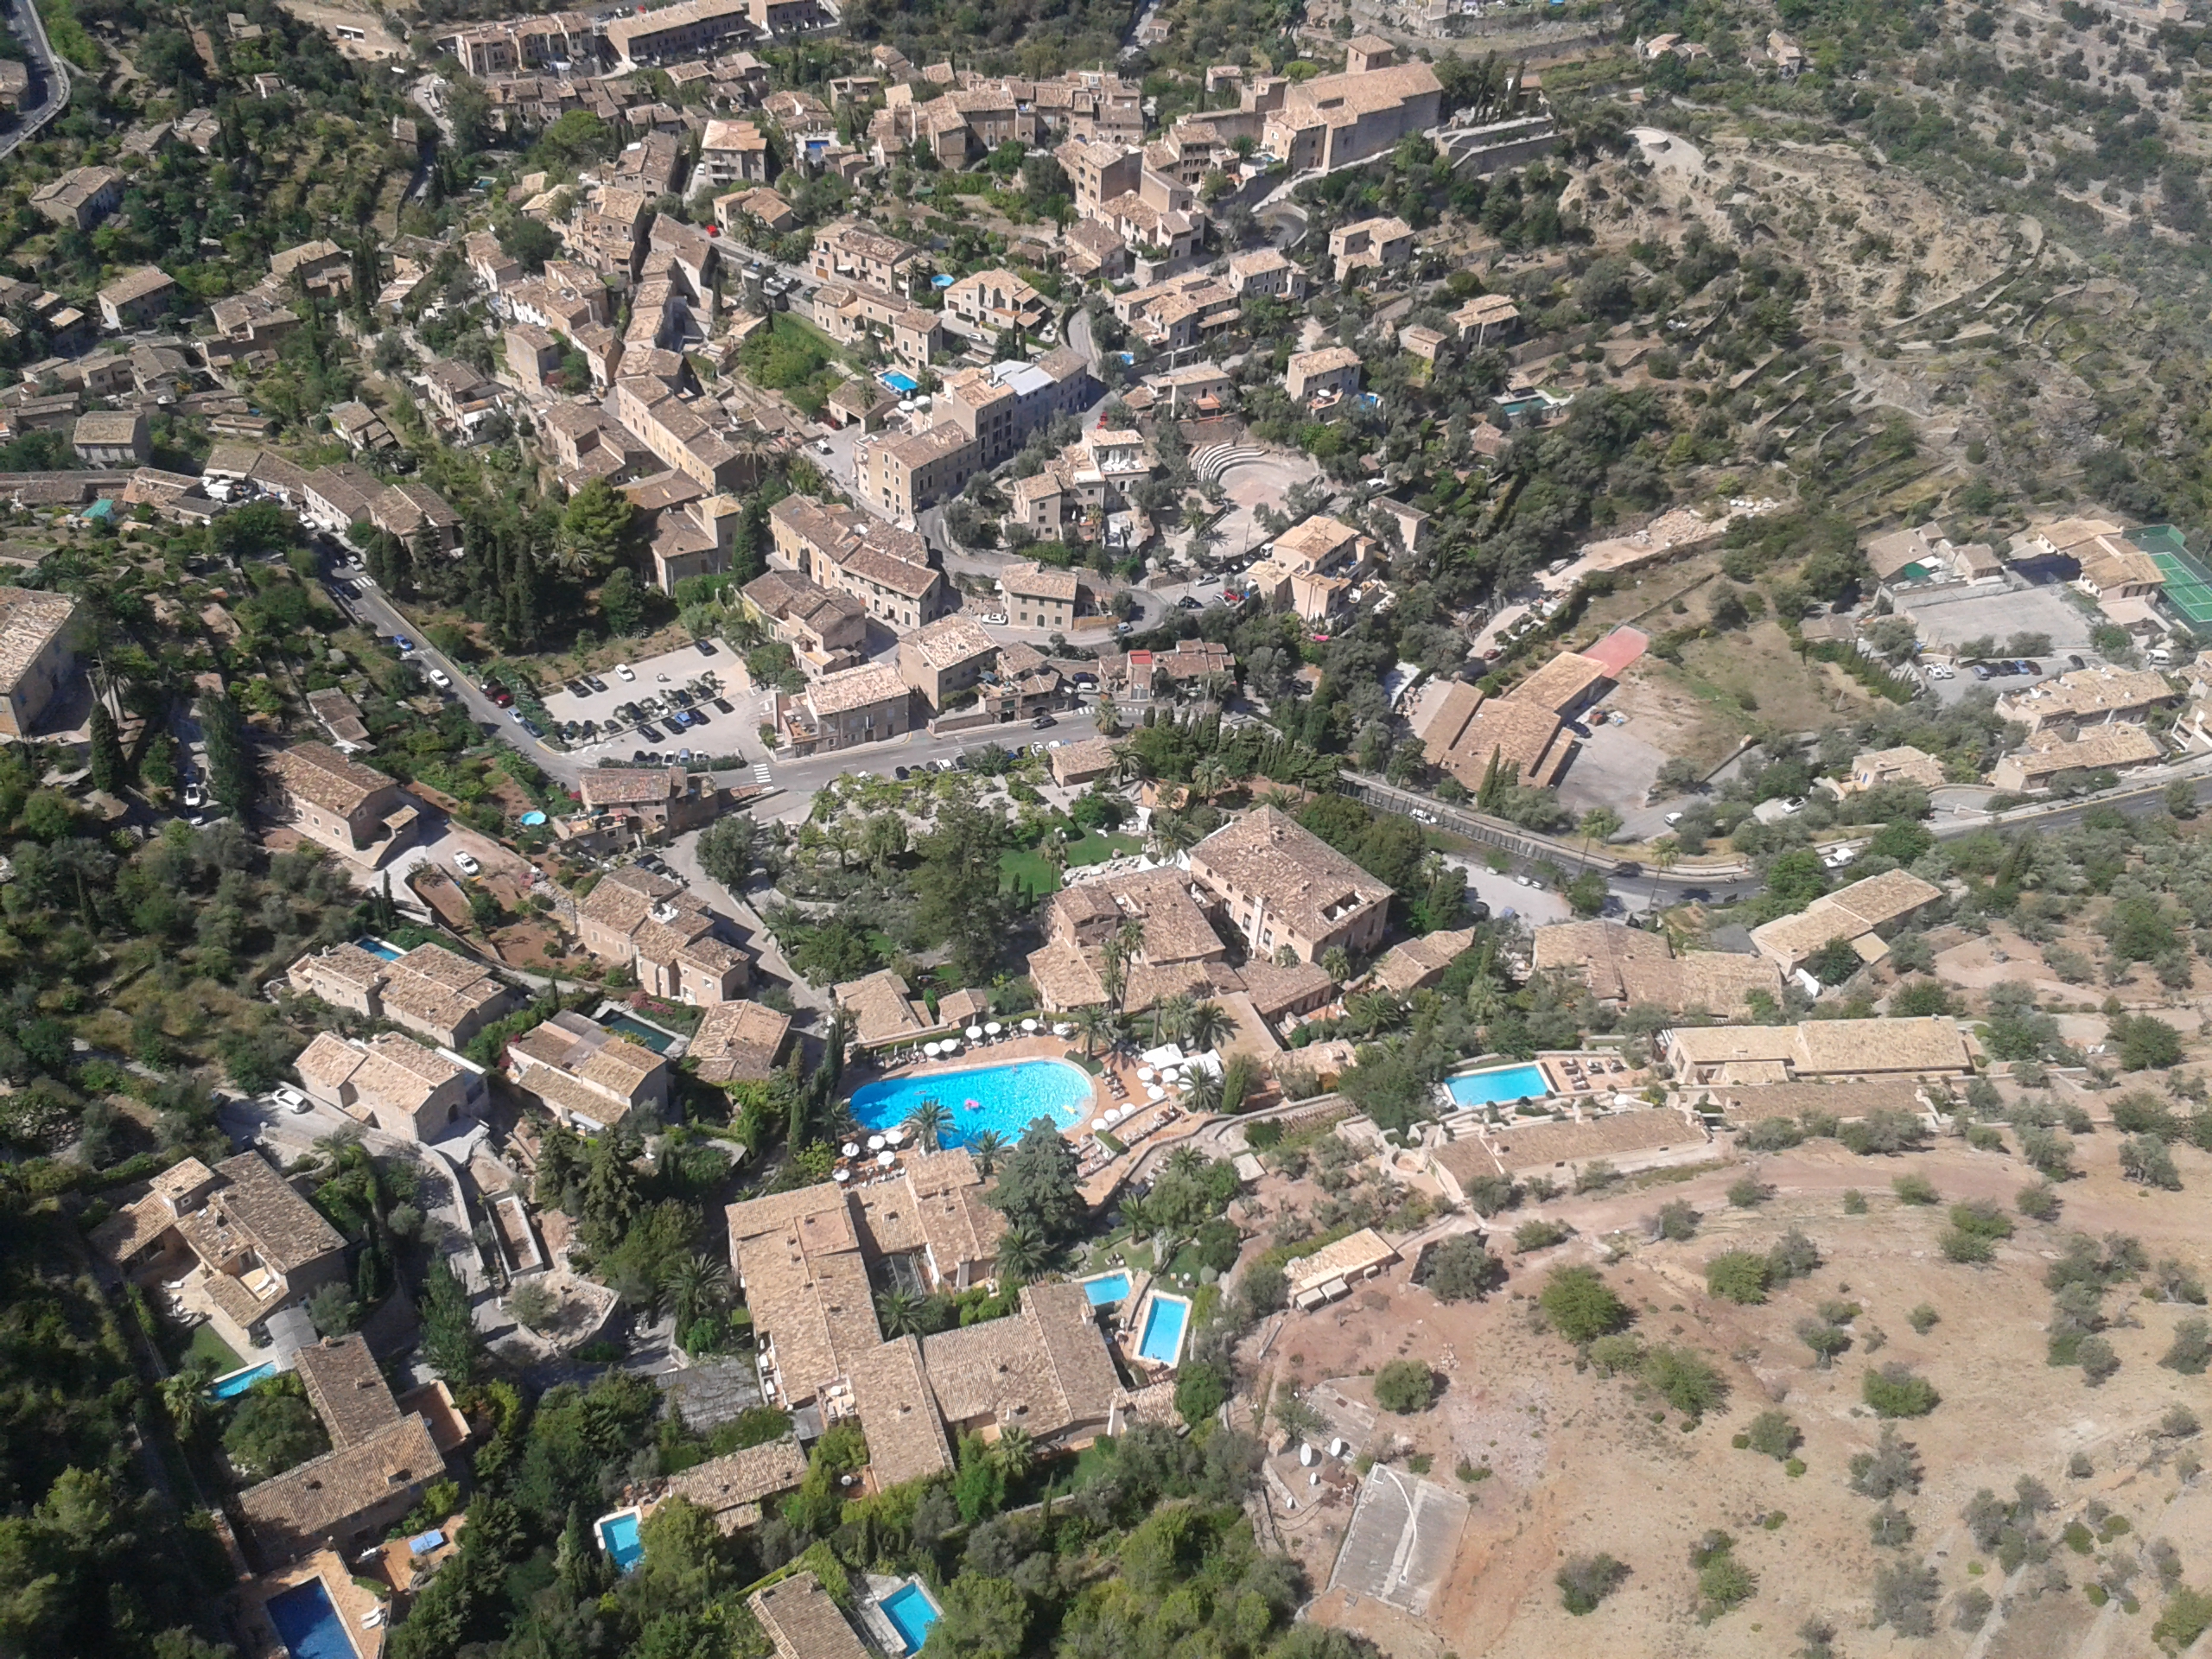 The hilltop town of Deia from the sky